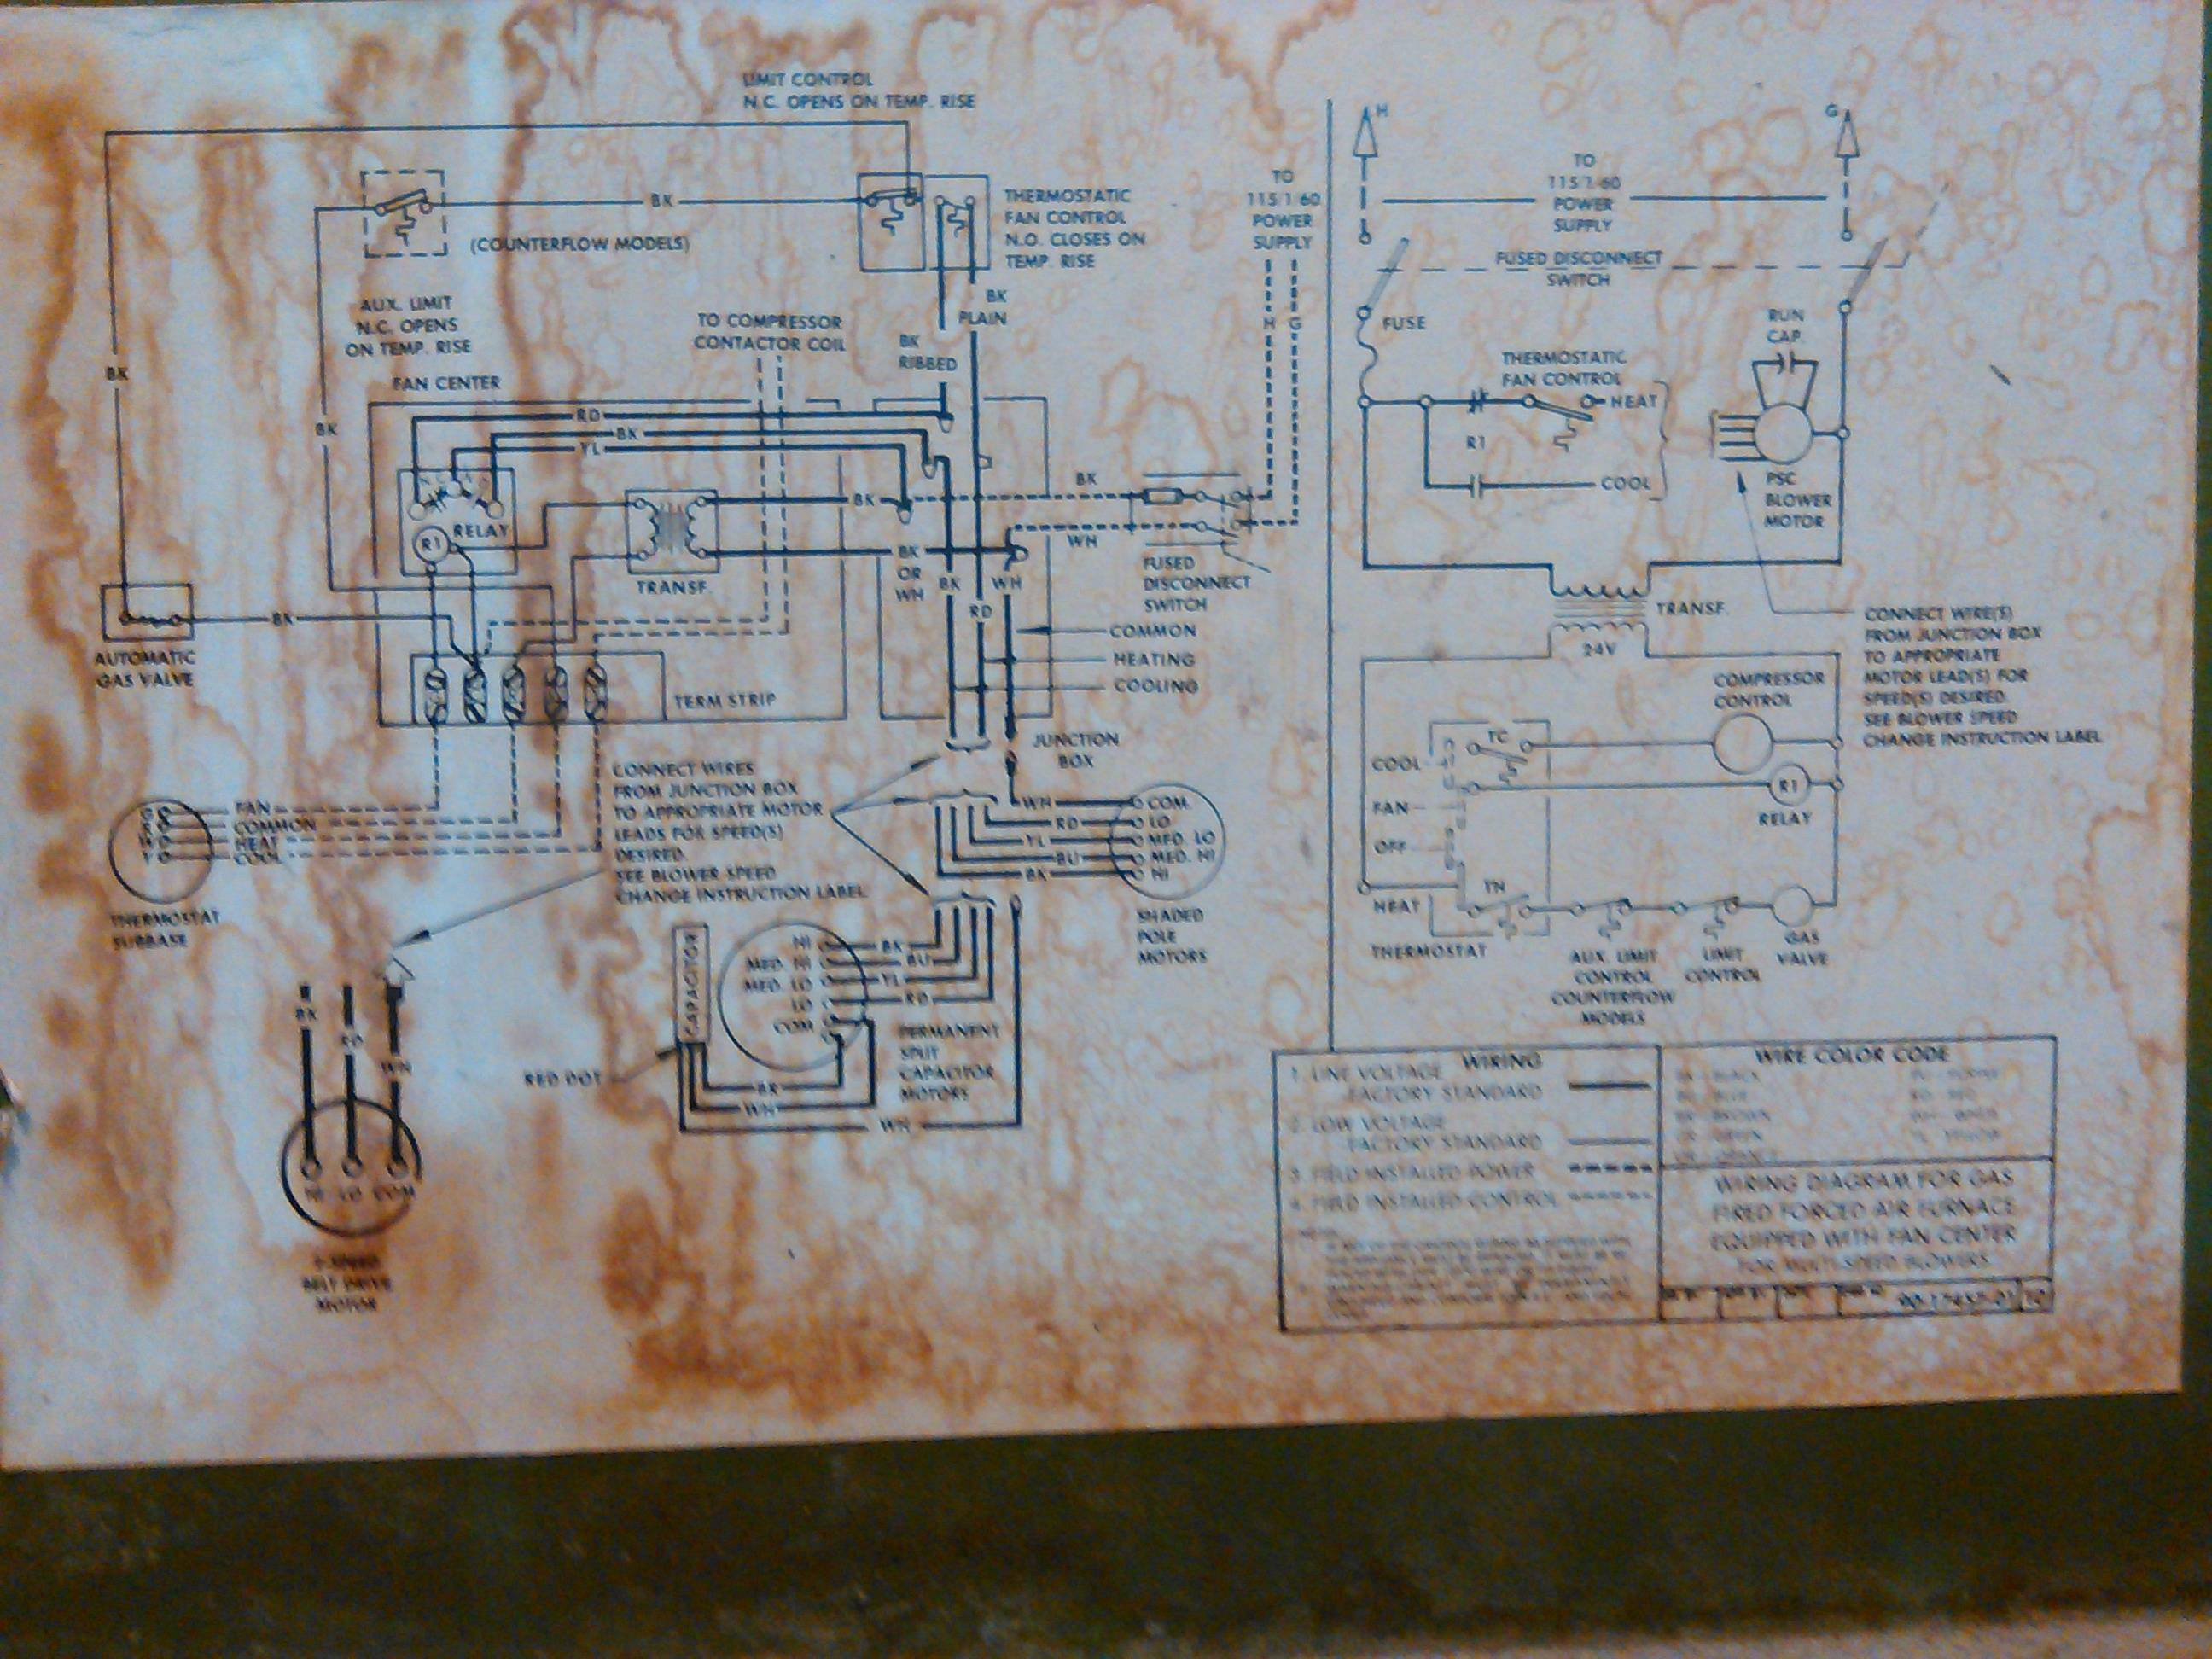 Hvac - Replace Old Furnace Blower Motor With A New One But The Wires - Coleman Electric Furnace Wiring Diagram